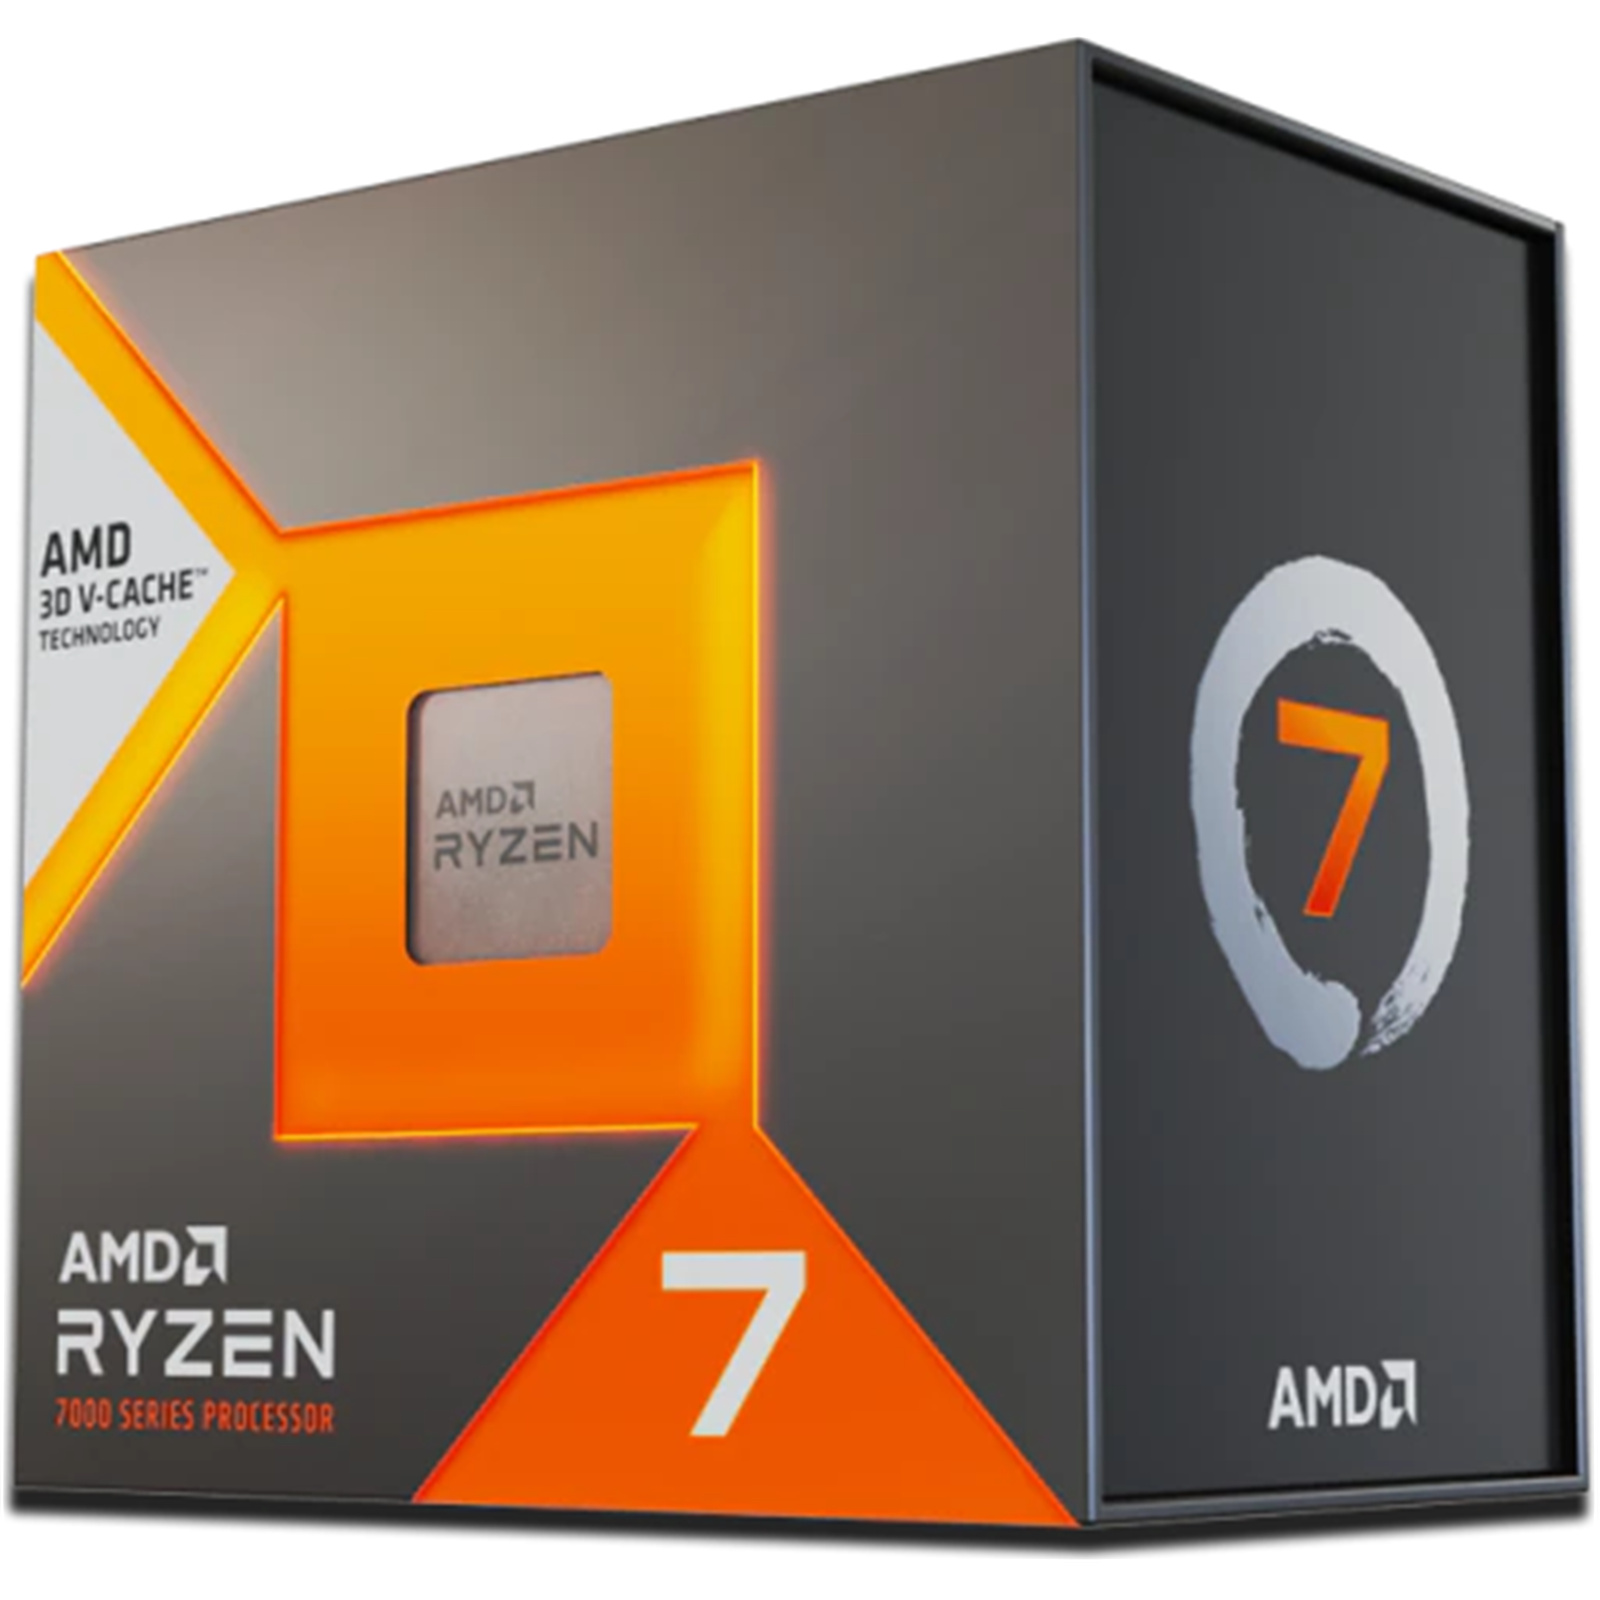 AMD Ryzen 7 7800X3D Review – We Told You To Wait!